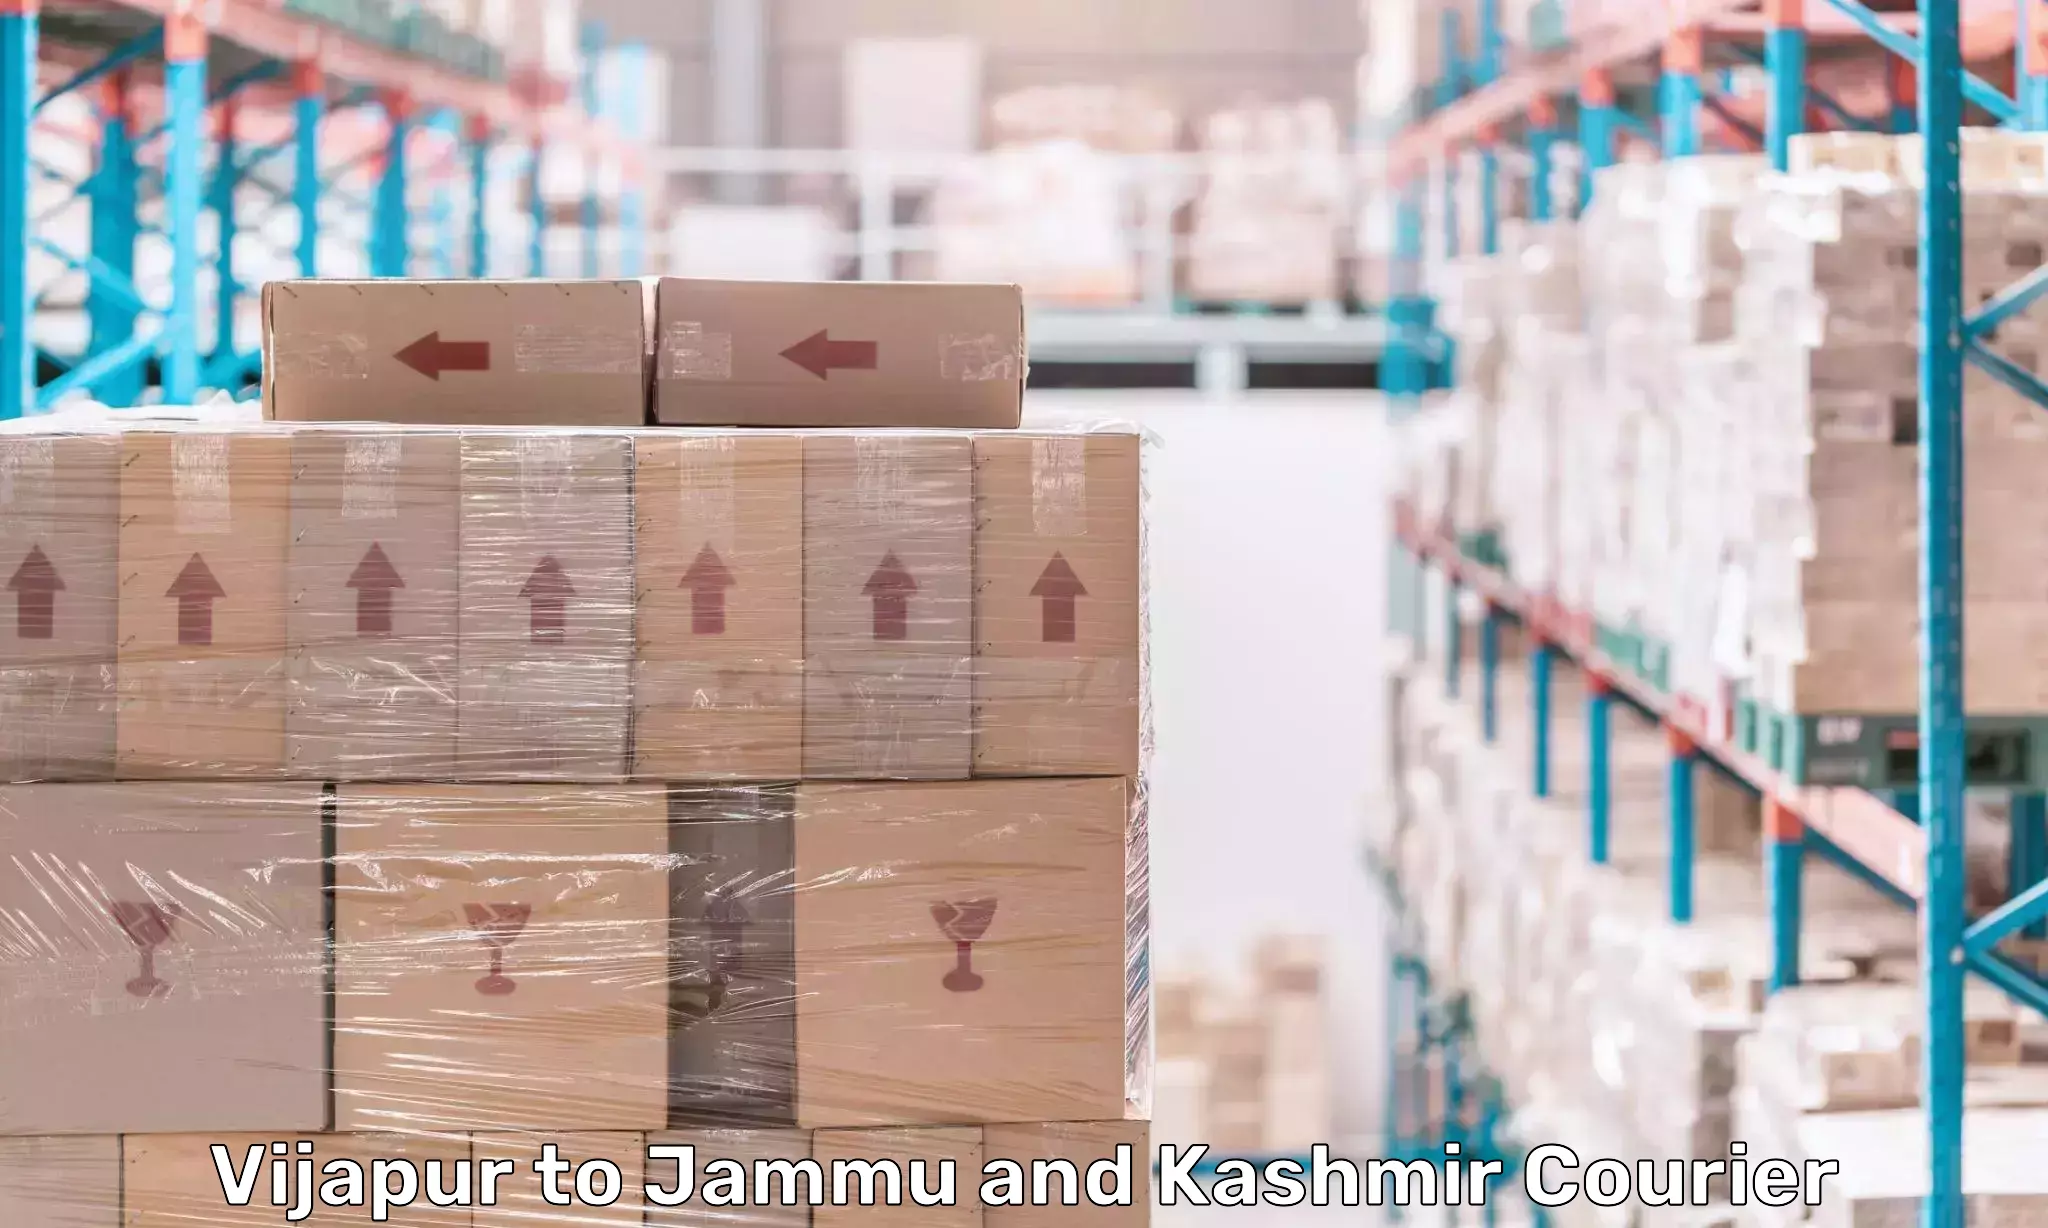 Sustainable delivery practices Vijapur to Jammu and Kashmir